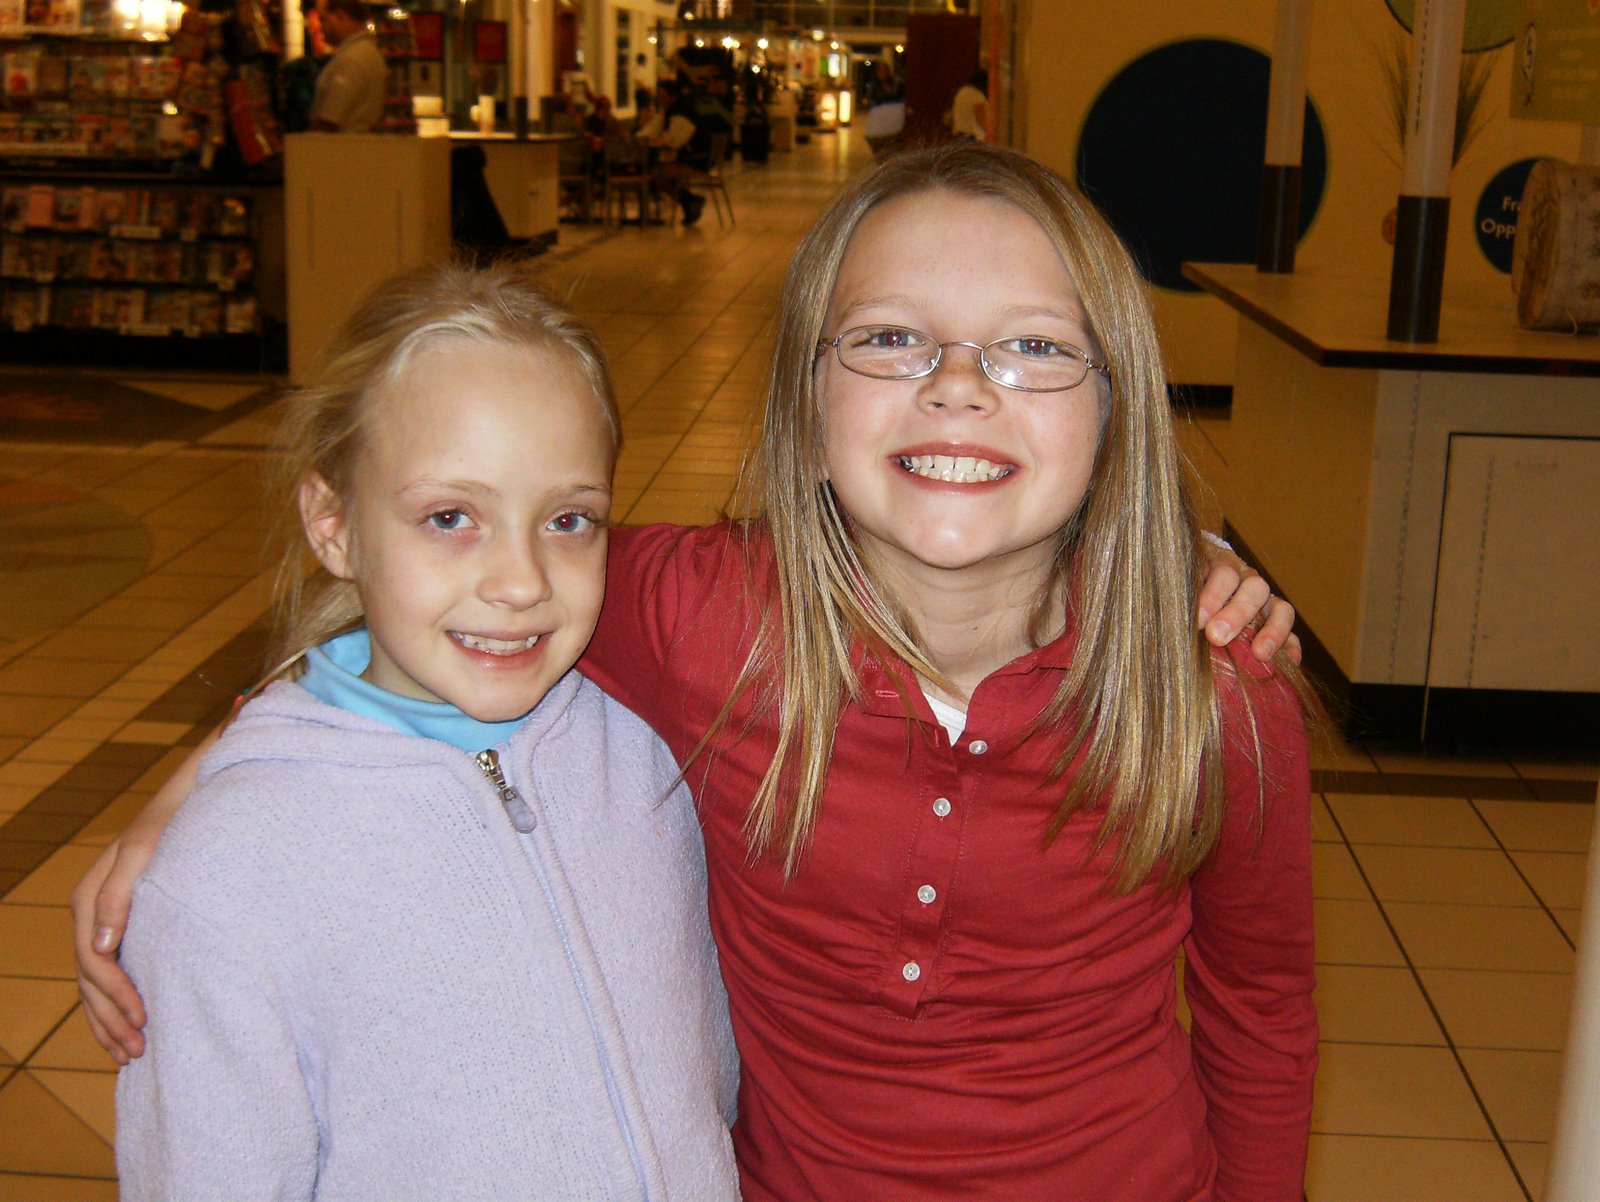 [Haily+and+Shannon+at+the+Mall.JPG]